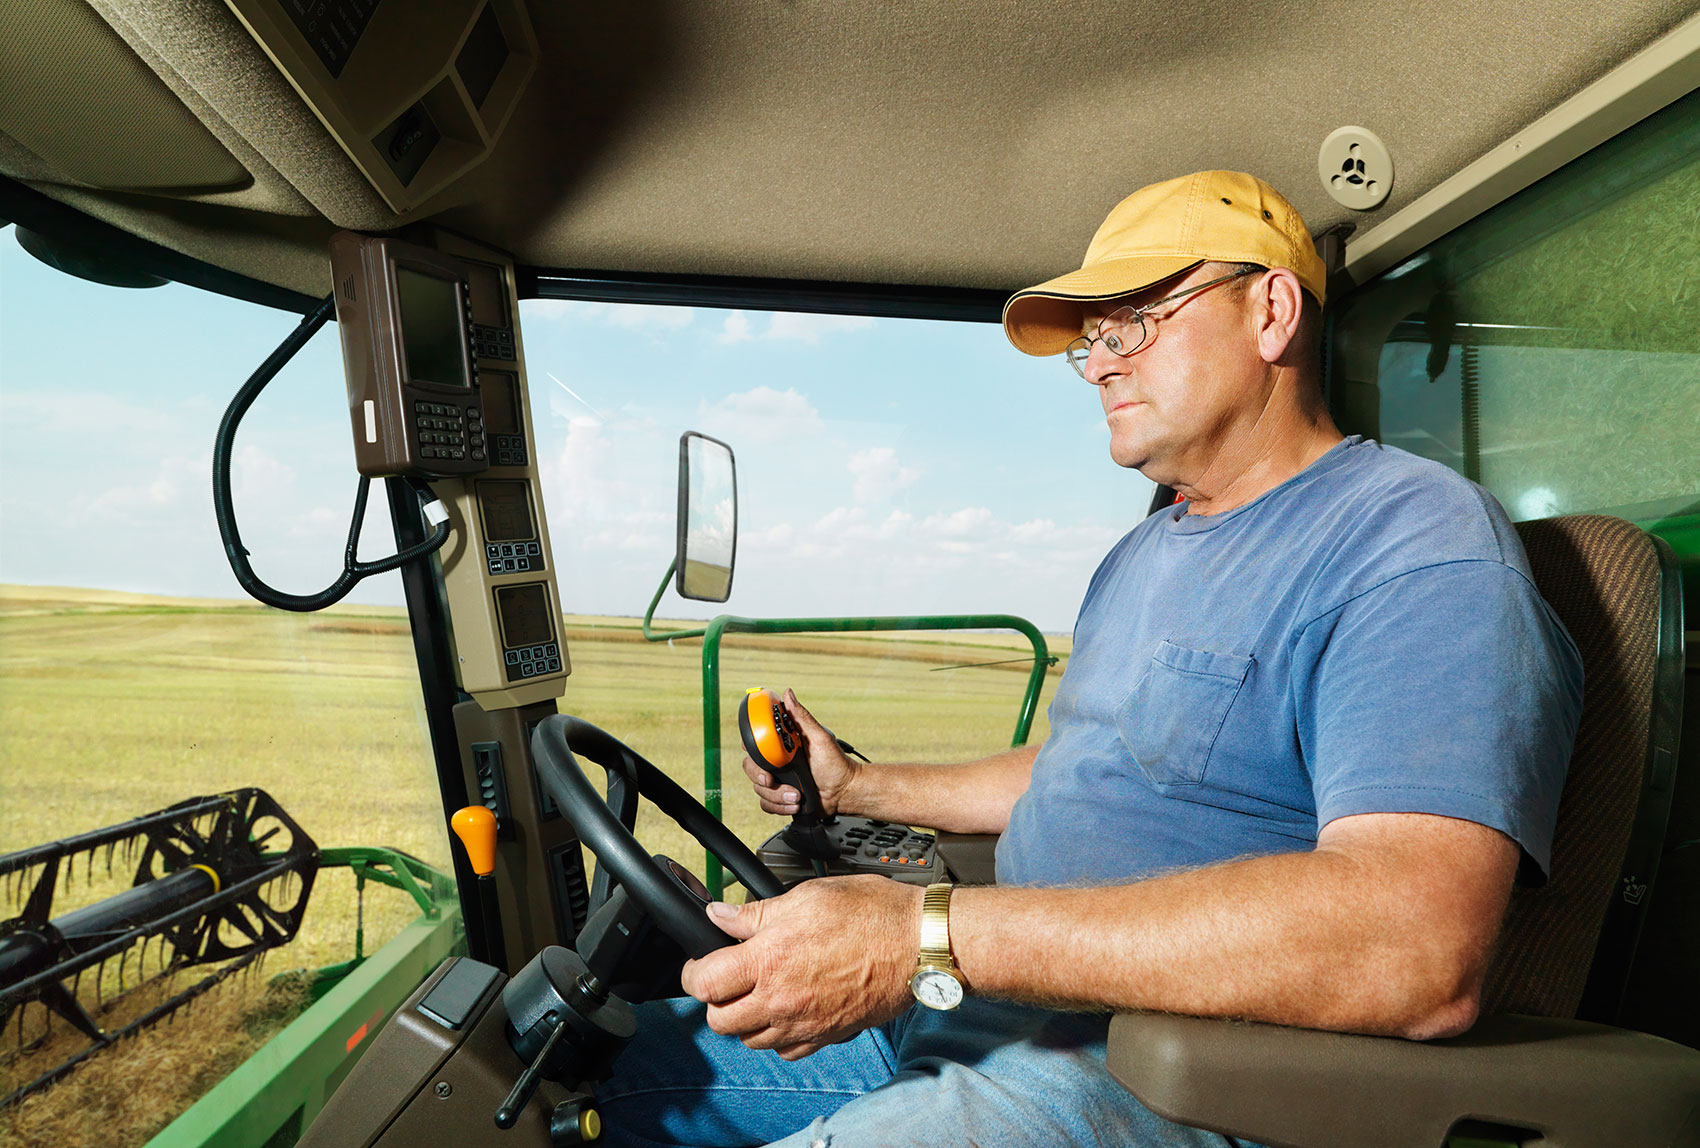  Protect What's Important   Farm Insurance    Learn More  